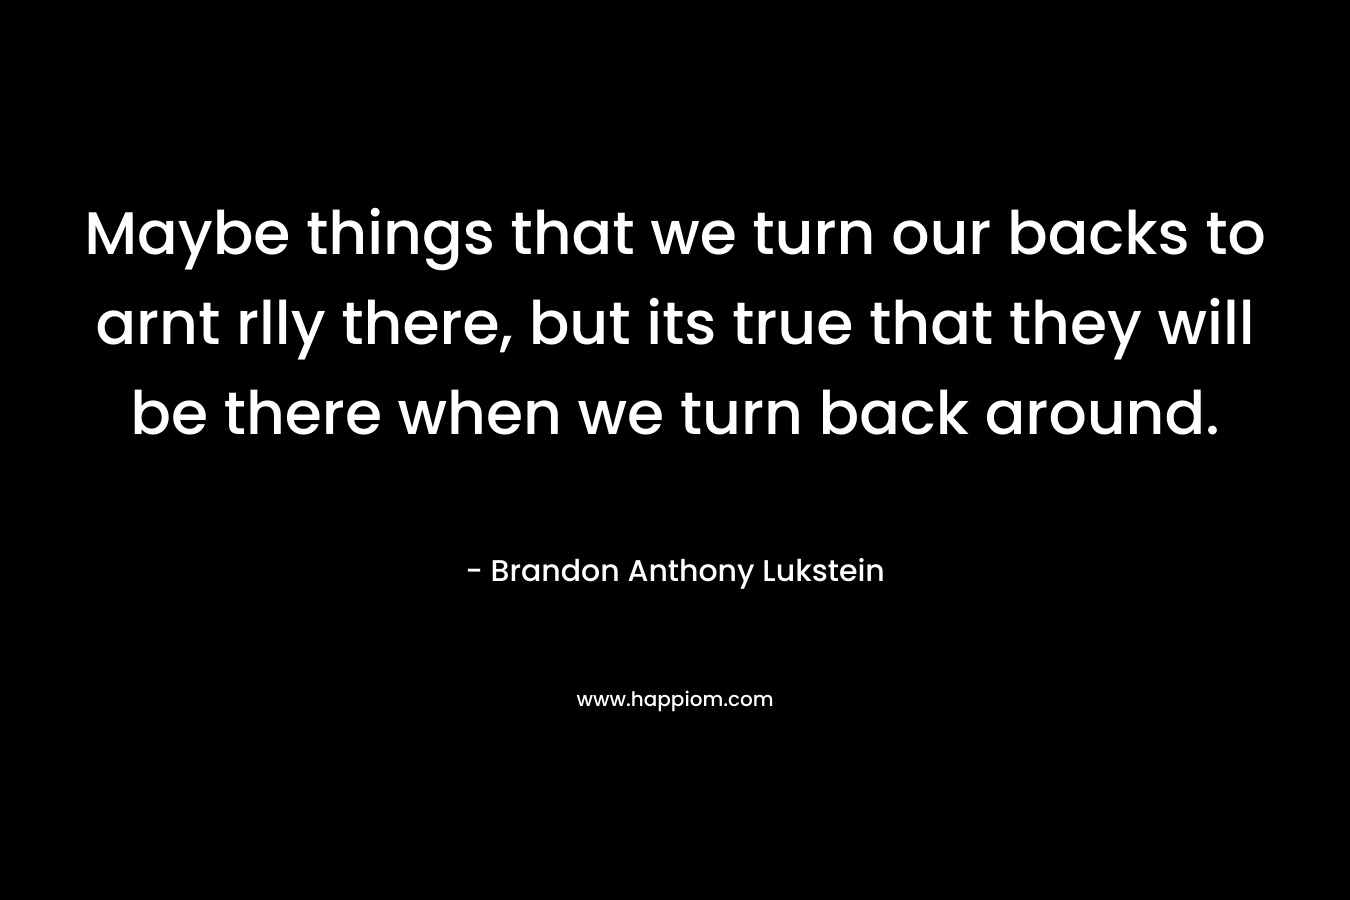 Maybe things that we turn our backs to arnt rlly there, but its true that they will be there when we turn back around. – Brandon Anthony Lukstein